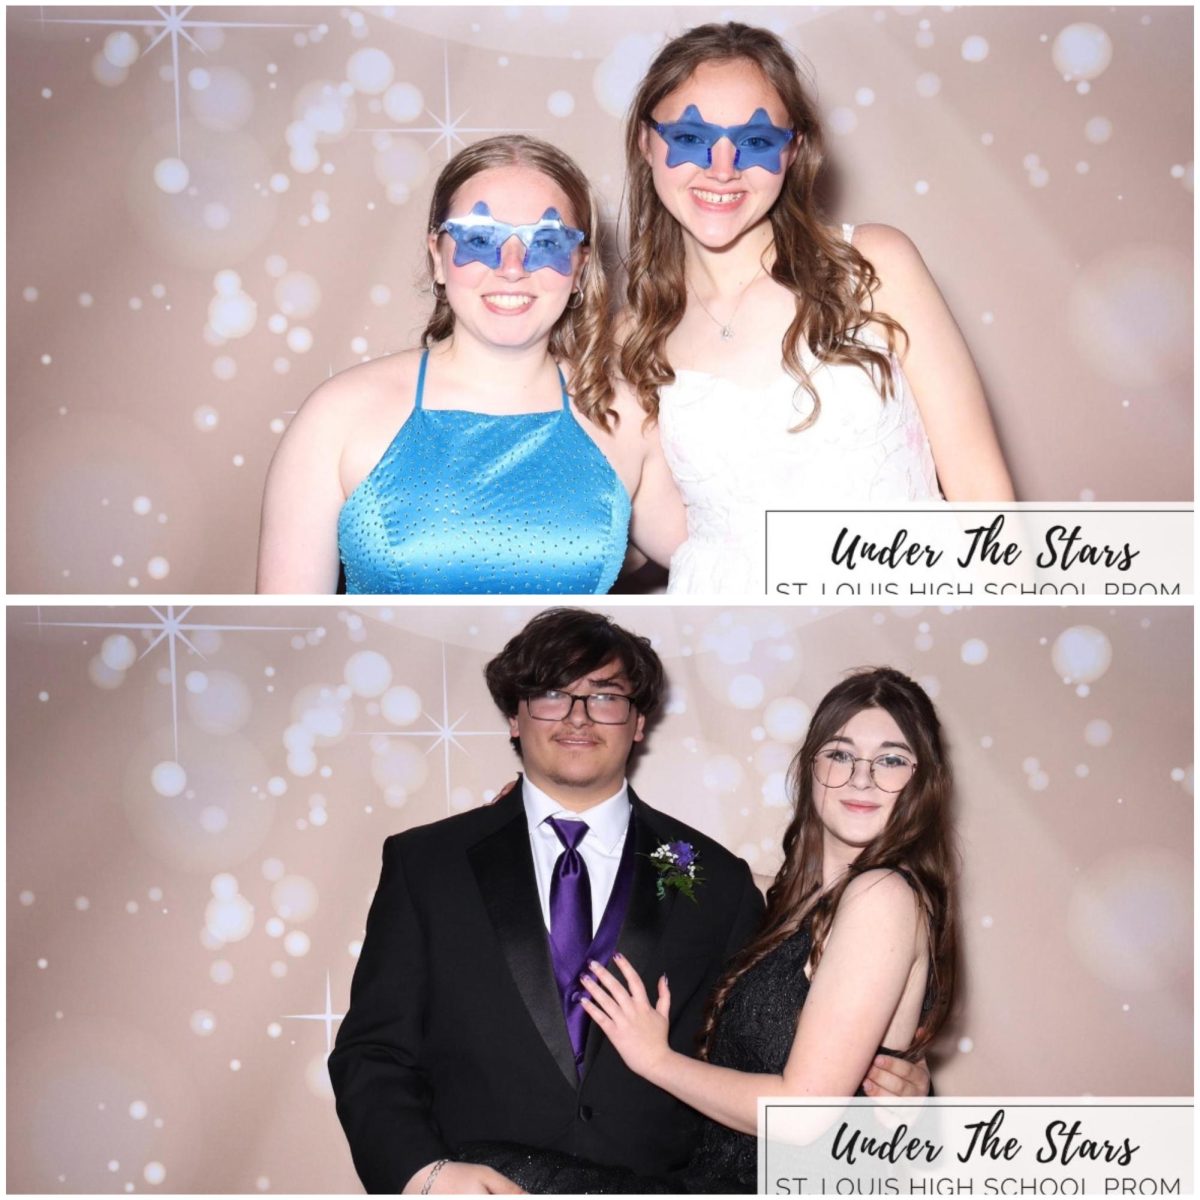 The prom photobooth was a success for both friends and couples alike!